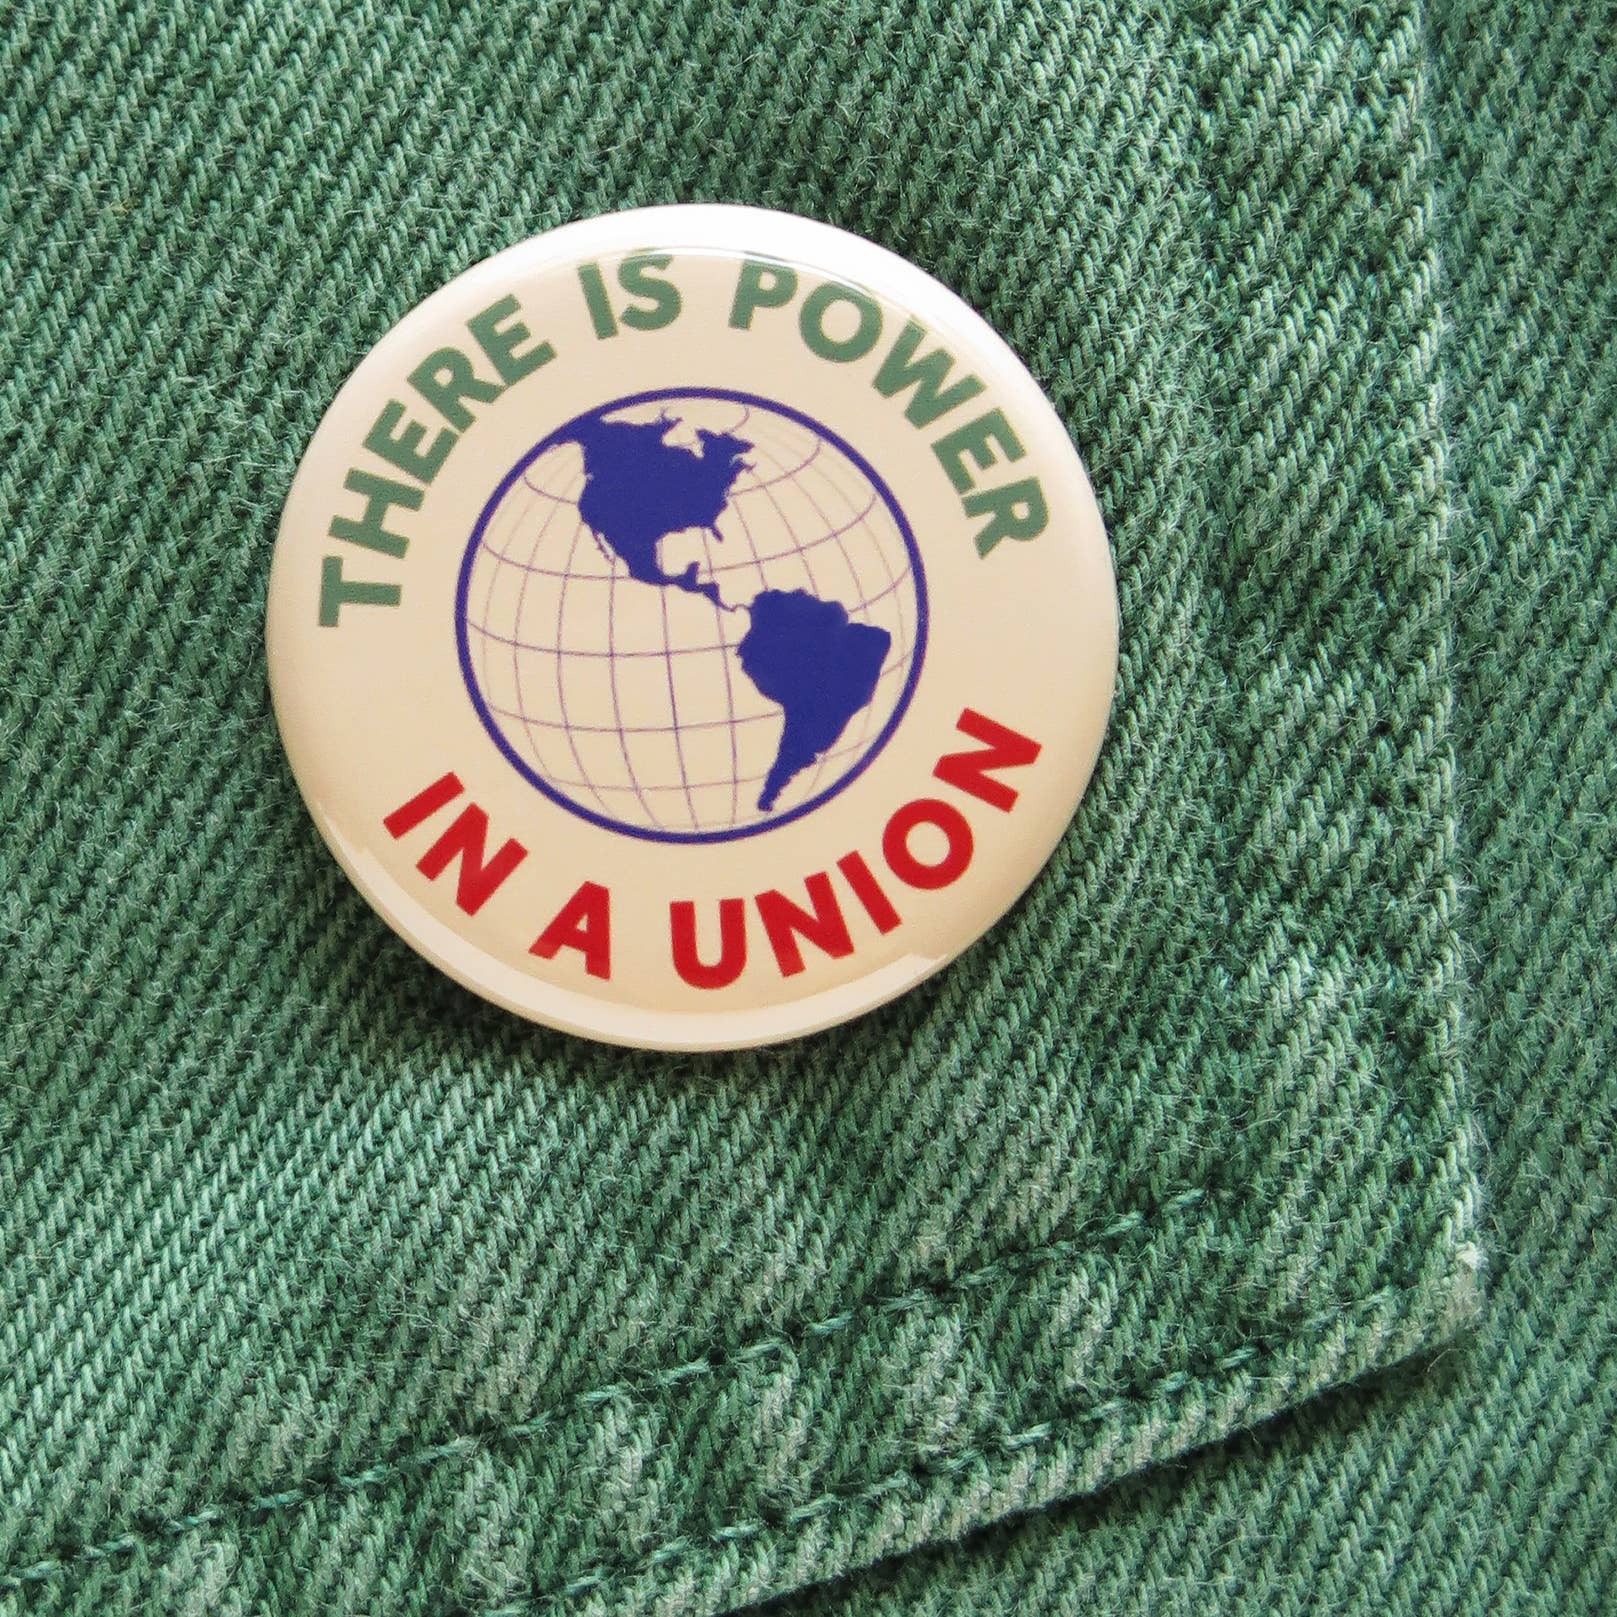 THERE IS POWER IN A UNION social justice pinback buttons